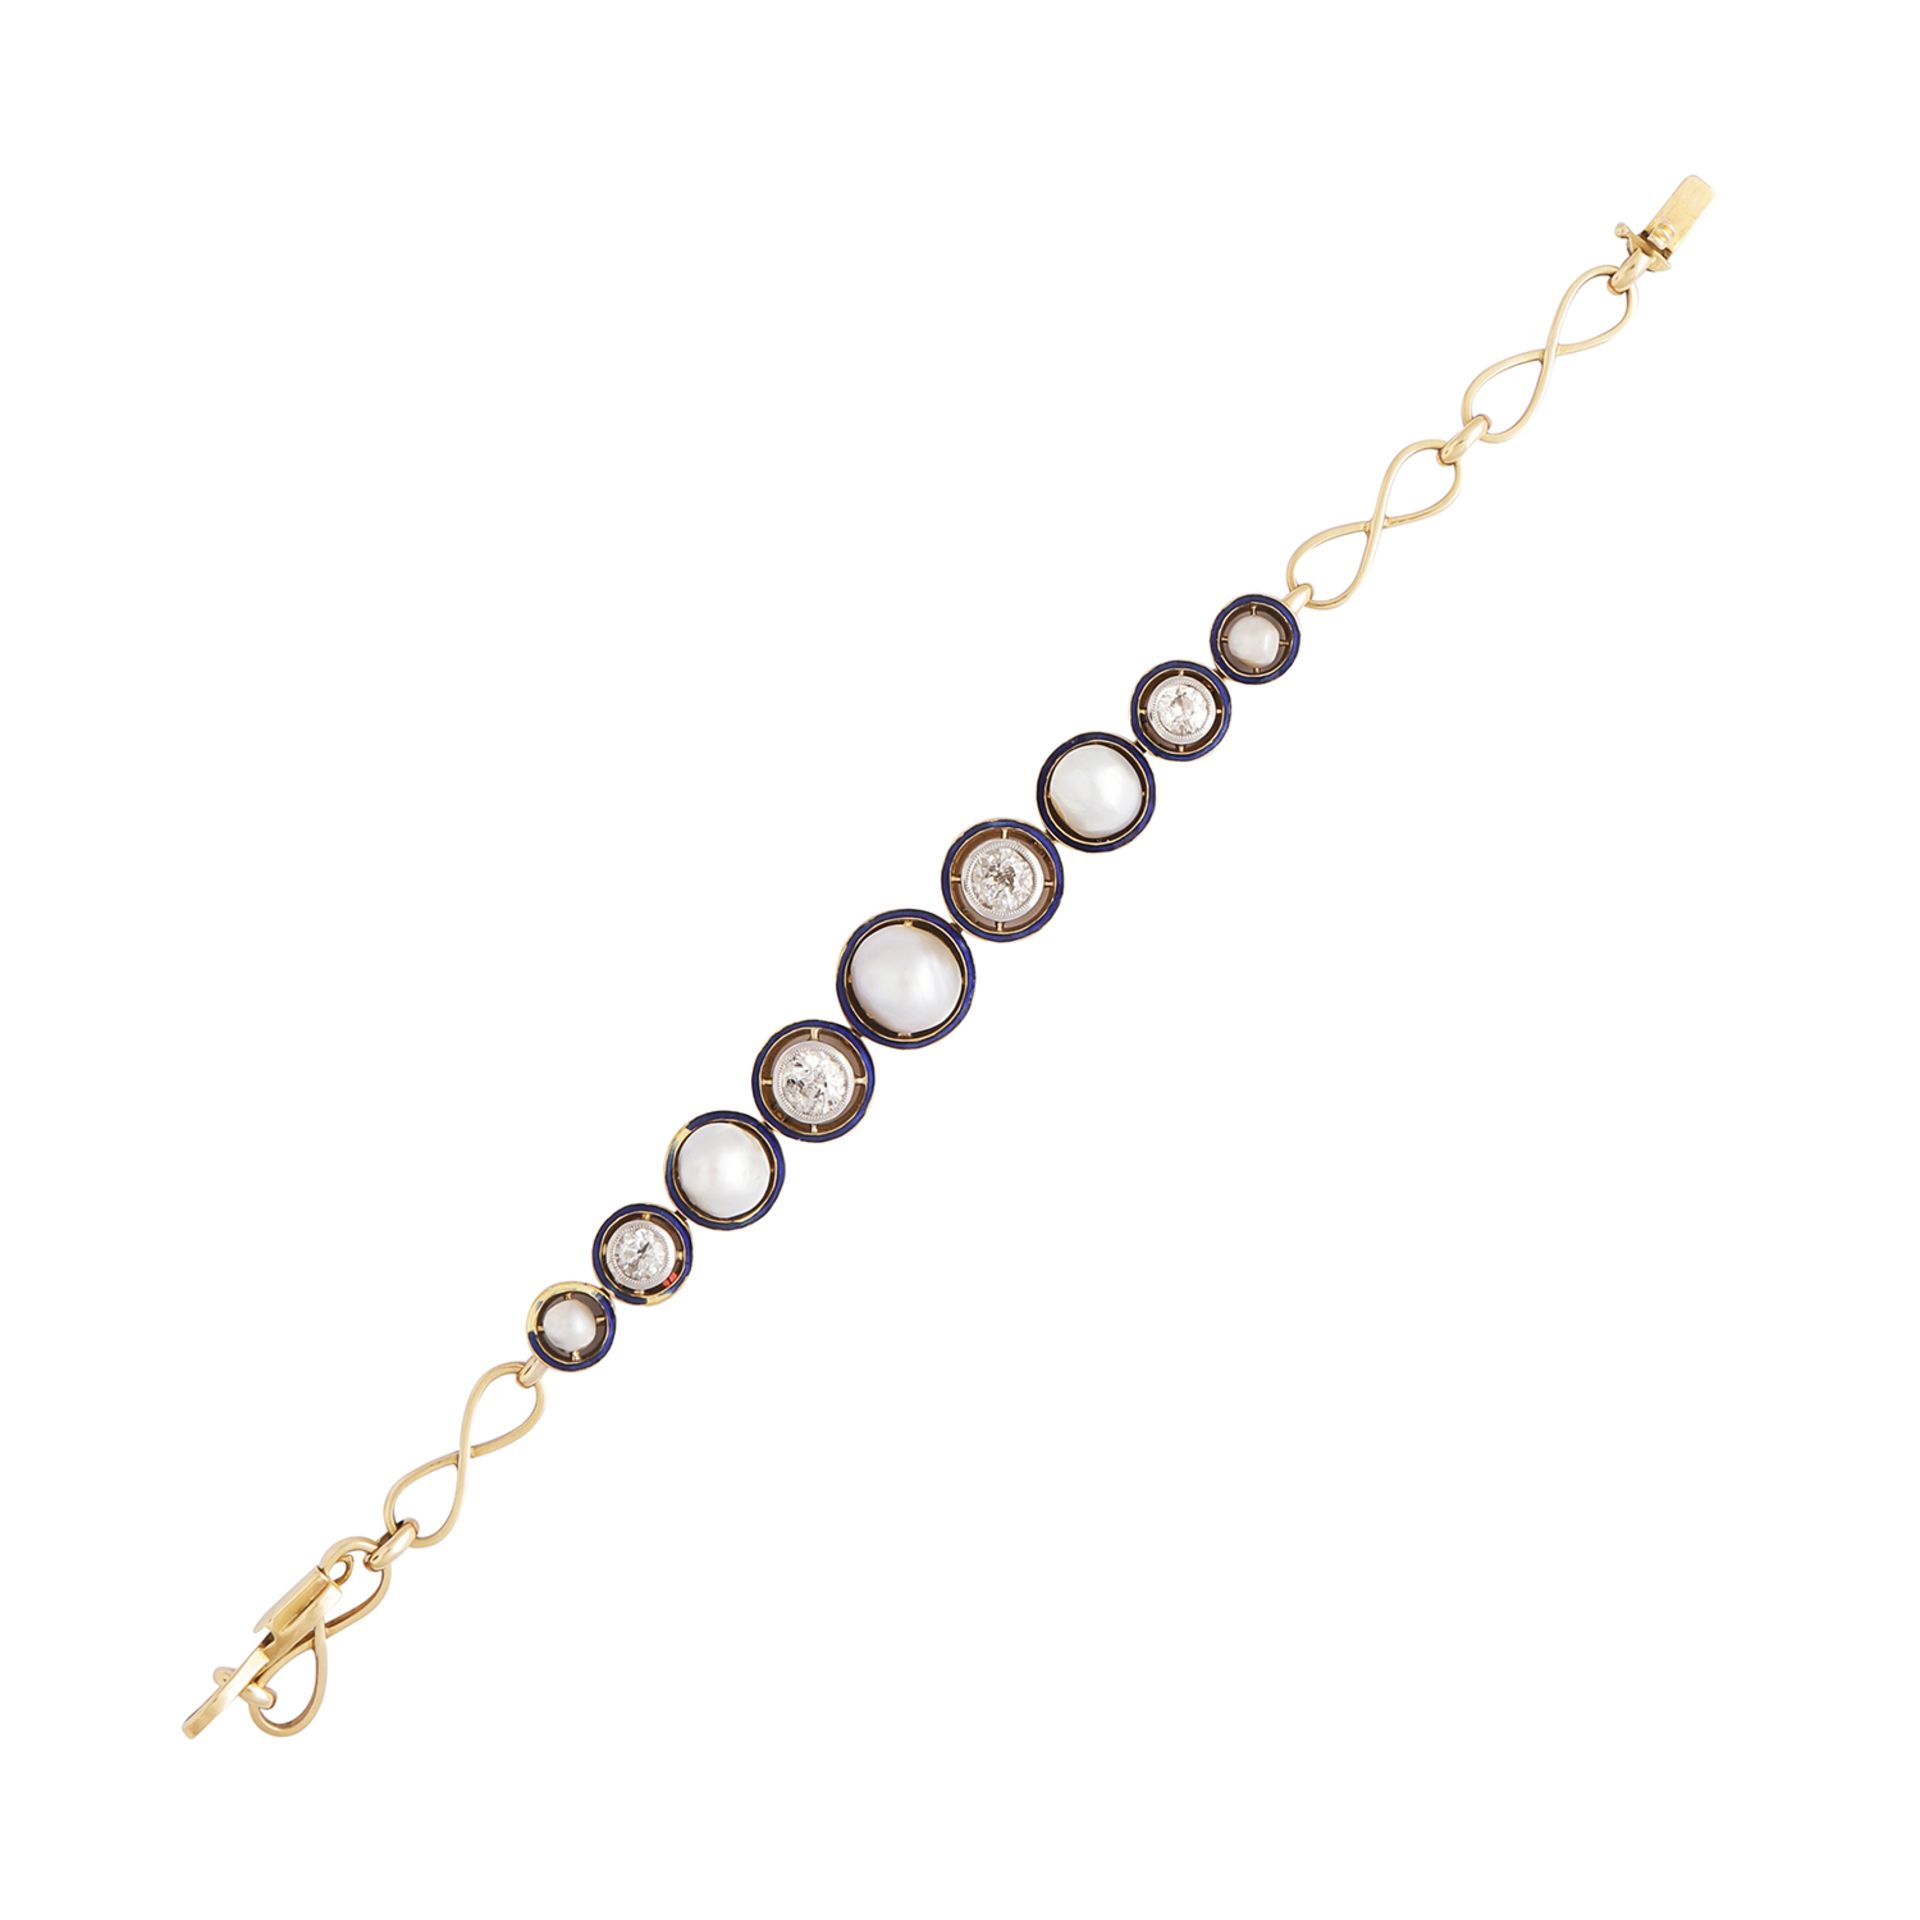 AN ART DECO NATURAL PEARL, DIAMOND AND ENAMEL BRACELET in yellow gold, jewelled with five natural